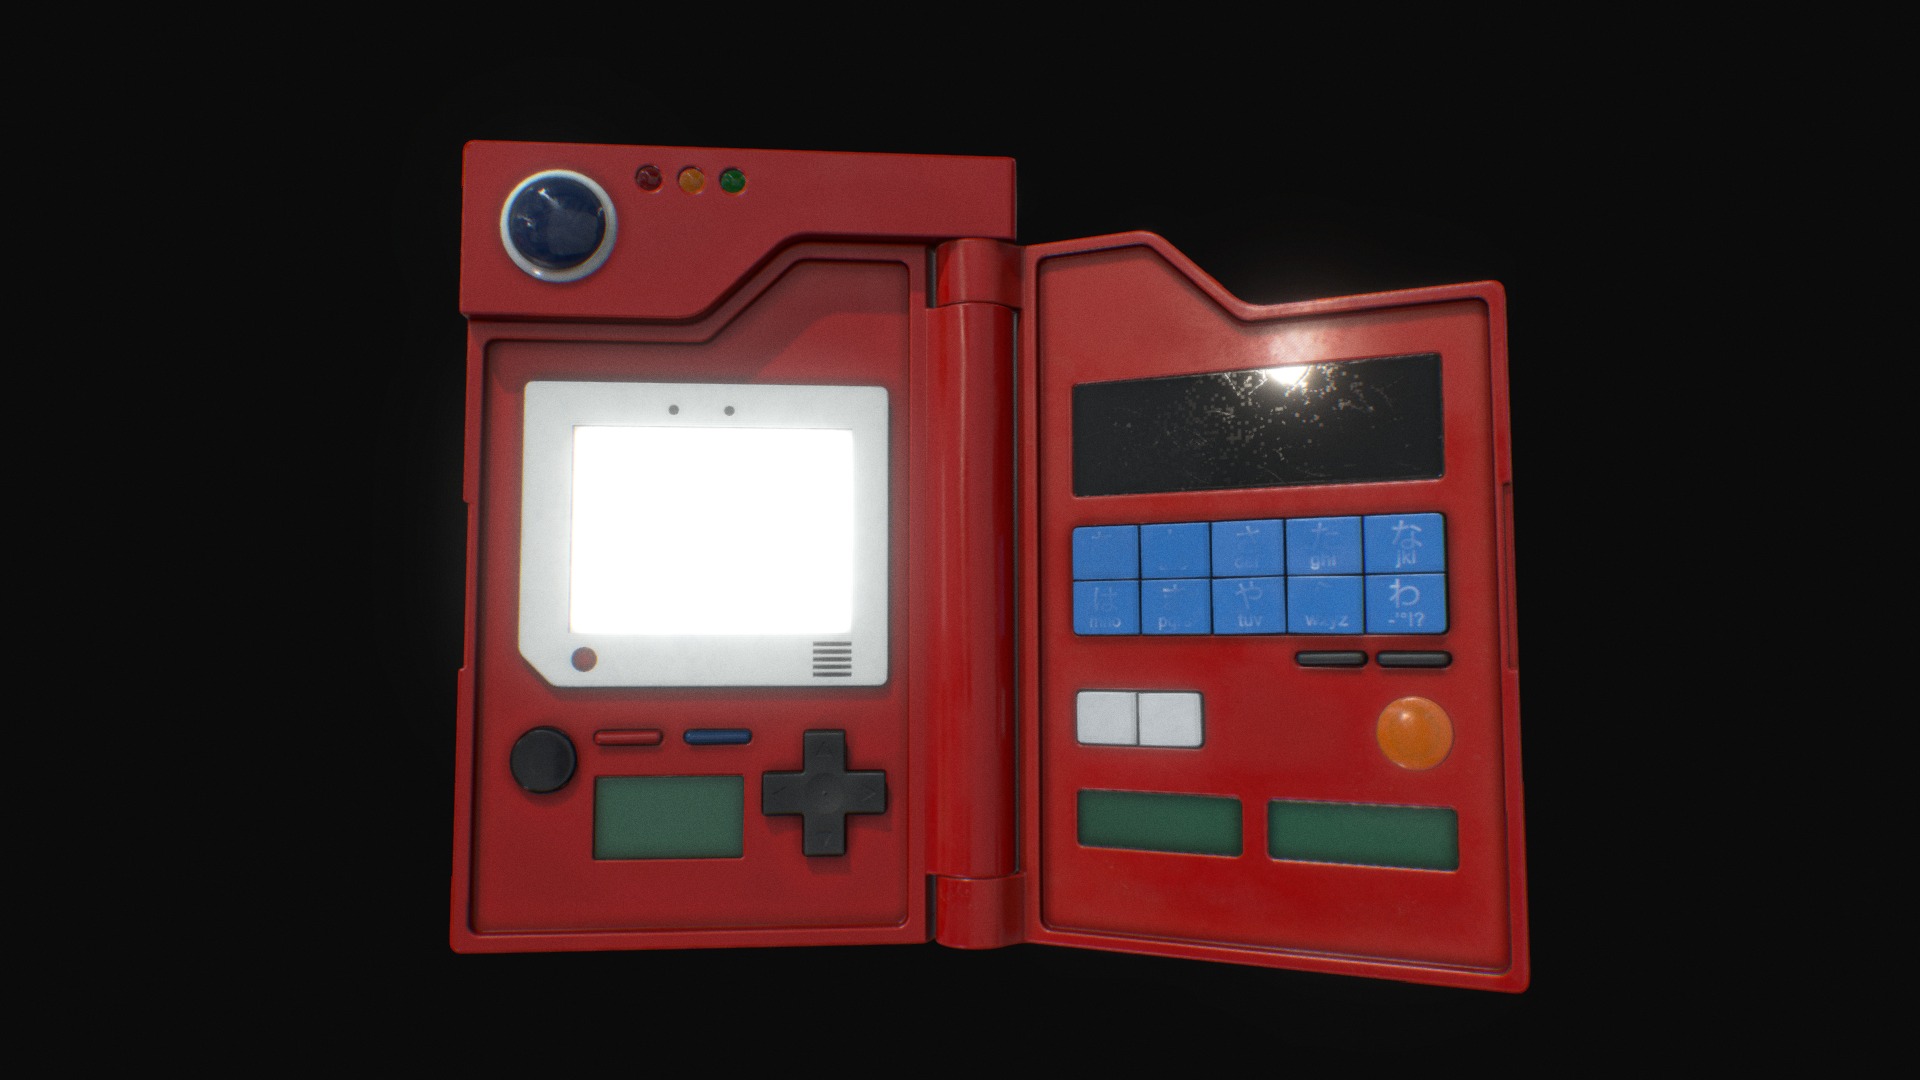 3D model Original Pokédex - This is a 3D model of the Original Pokédex. The 3D model is about a red and white gaming device.